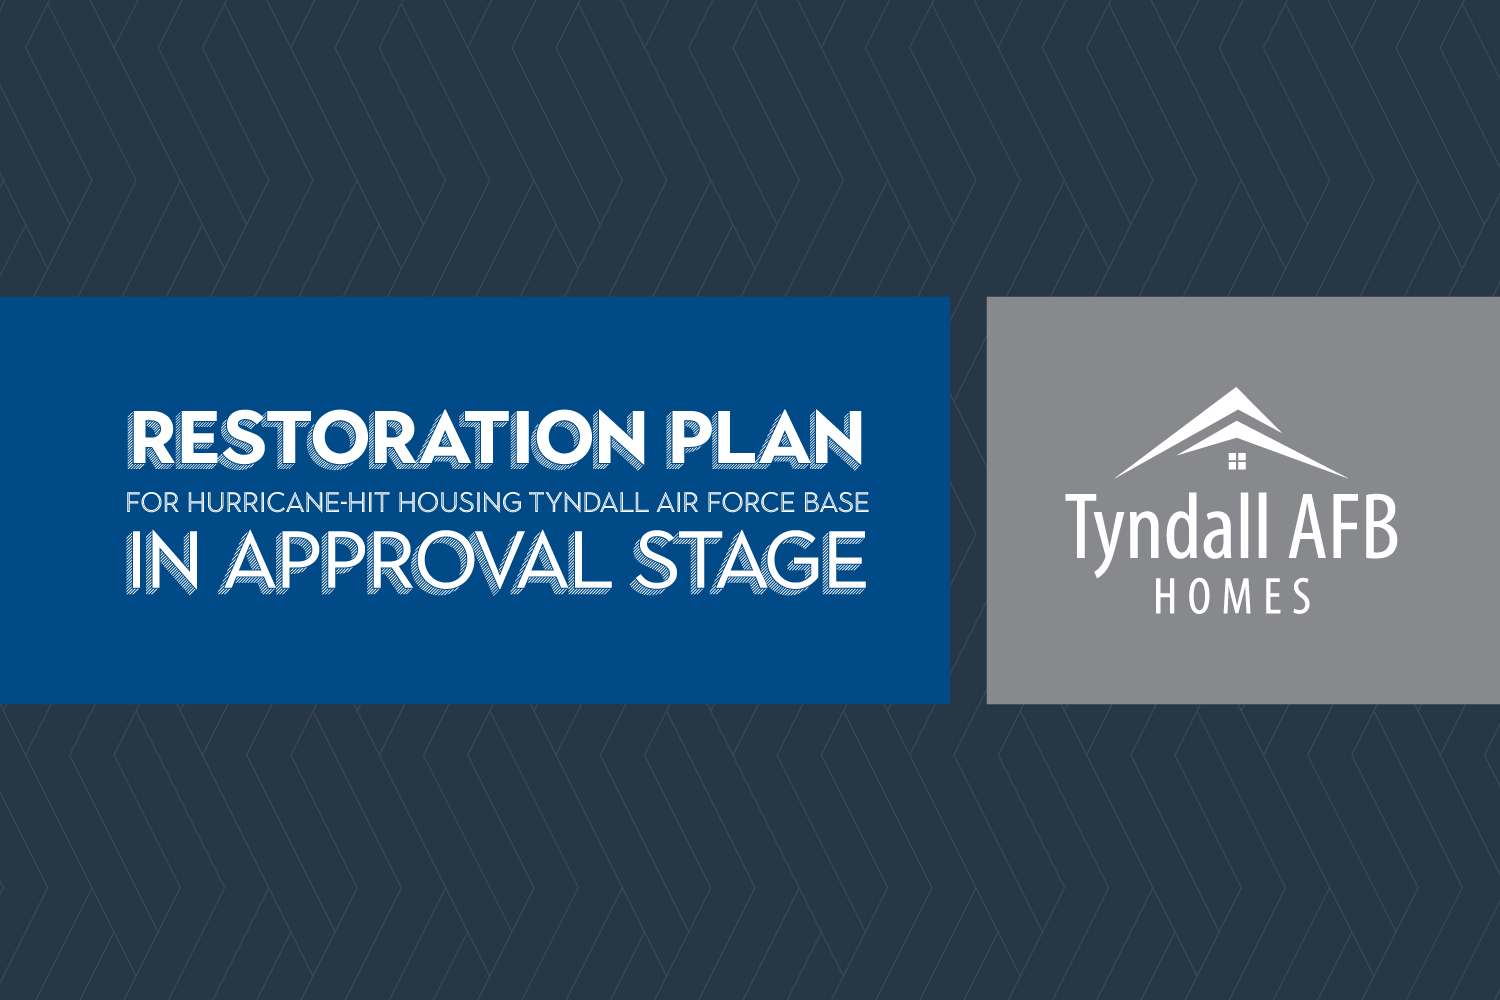 Restoration plan for hurricane-hit housing at Tyndall Air Force Base in approval stage